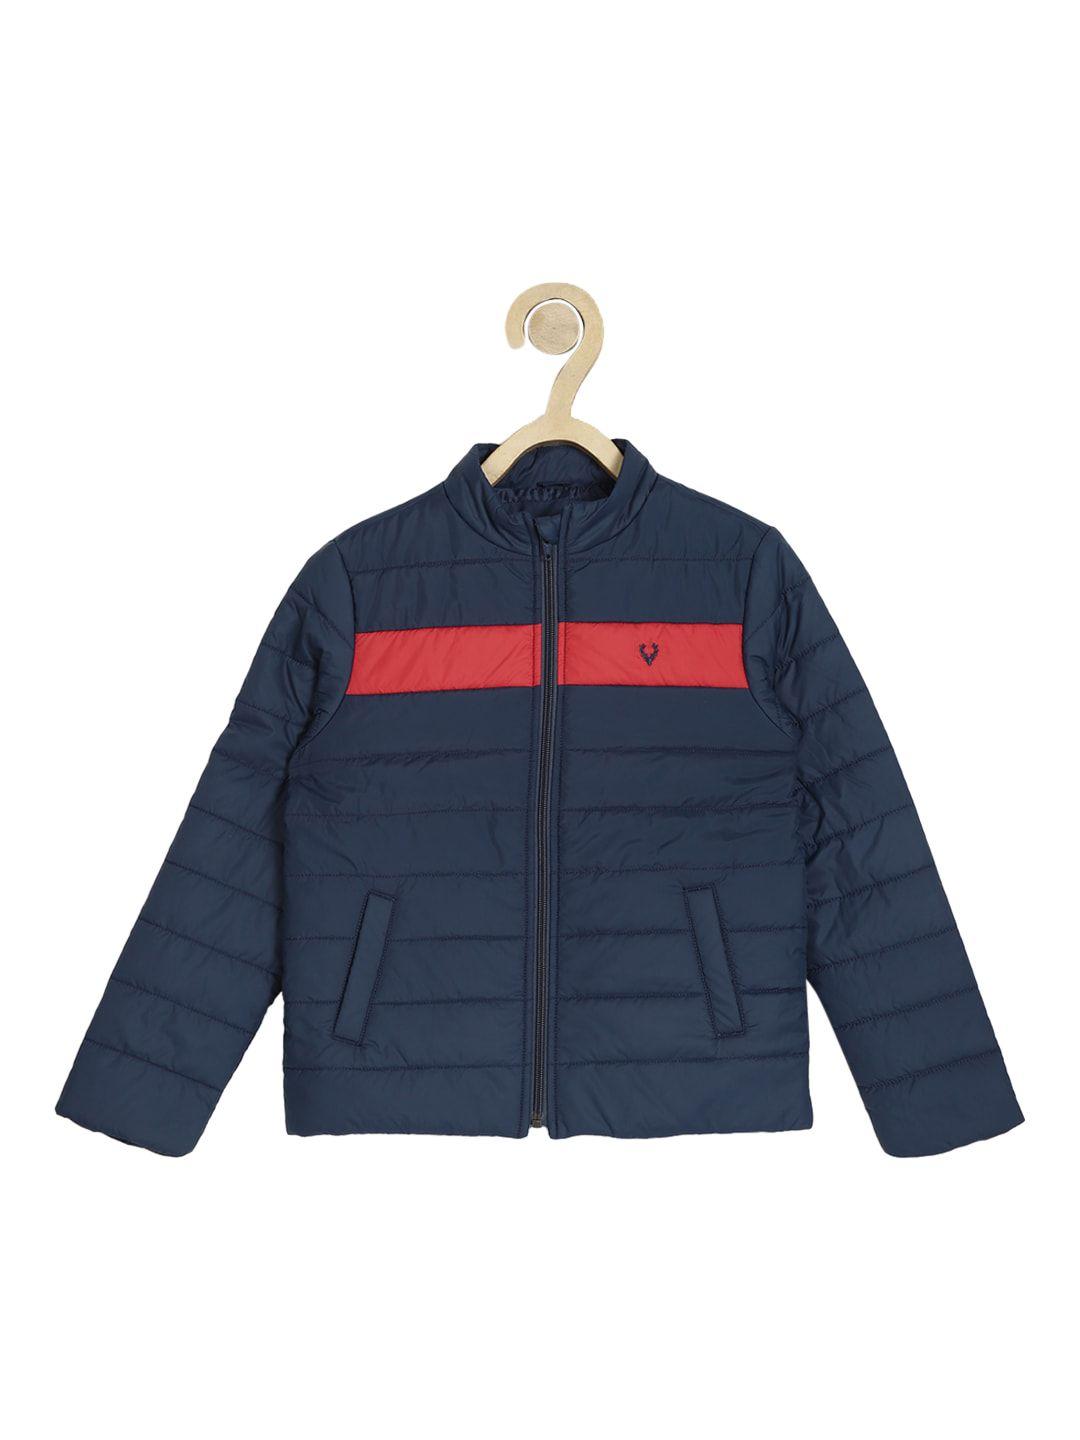 Allen Solly Junior Boys Navy Blue Colourblocked Puffer Jacket with Patchwork